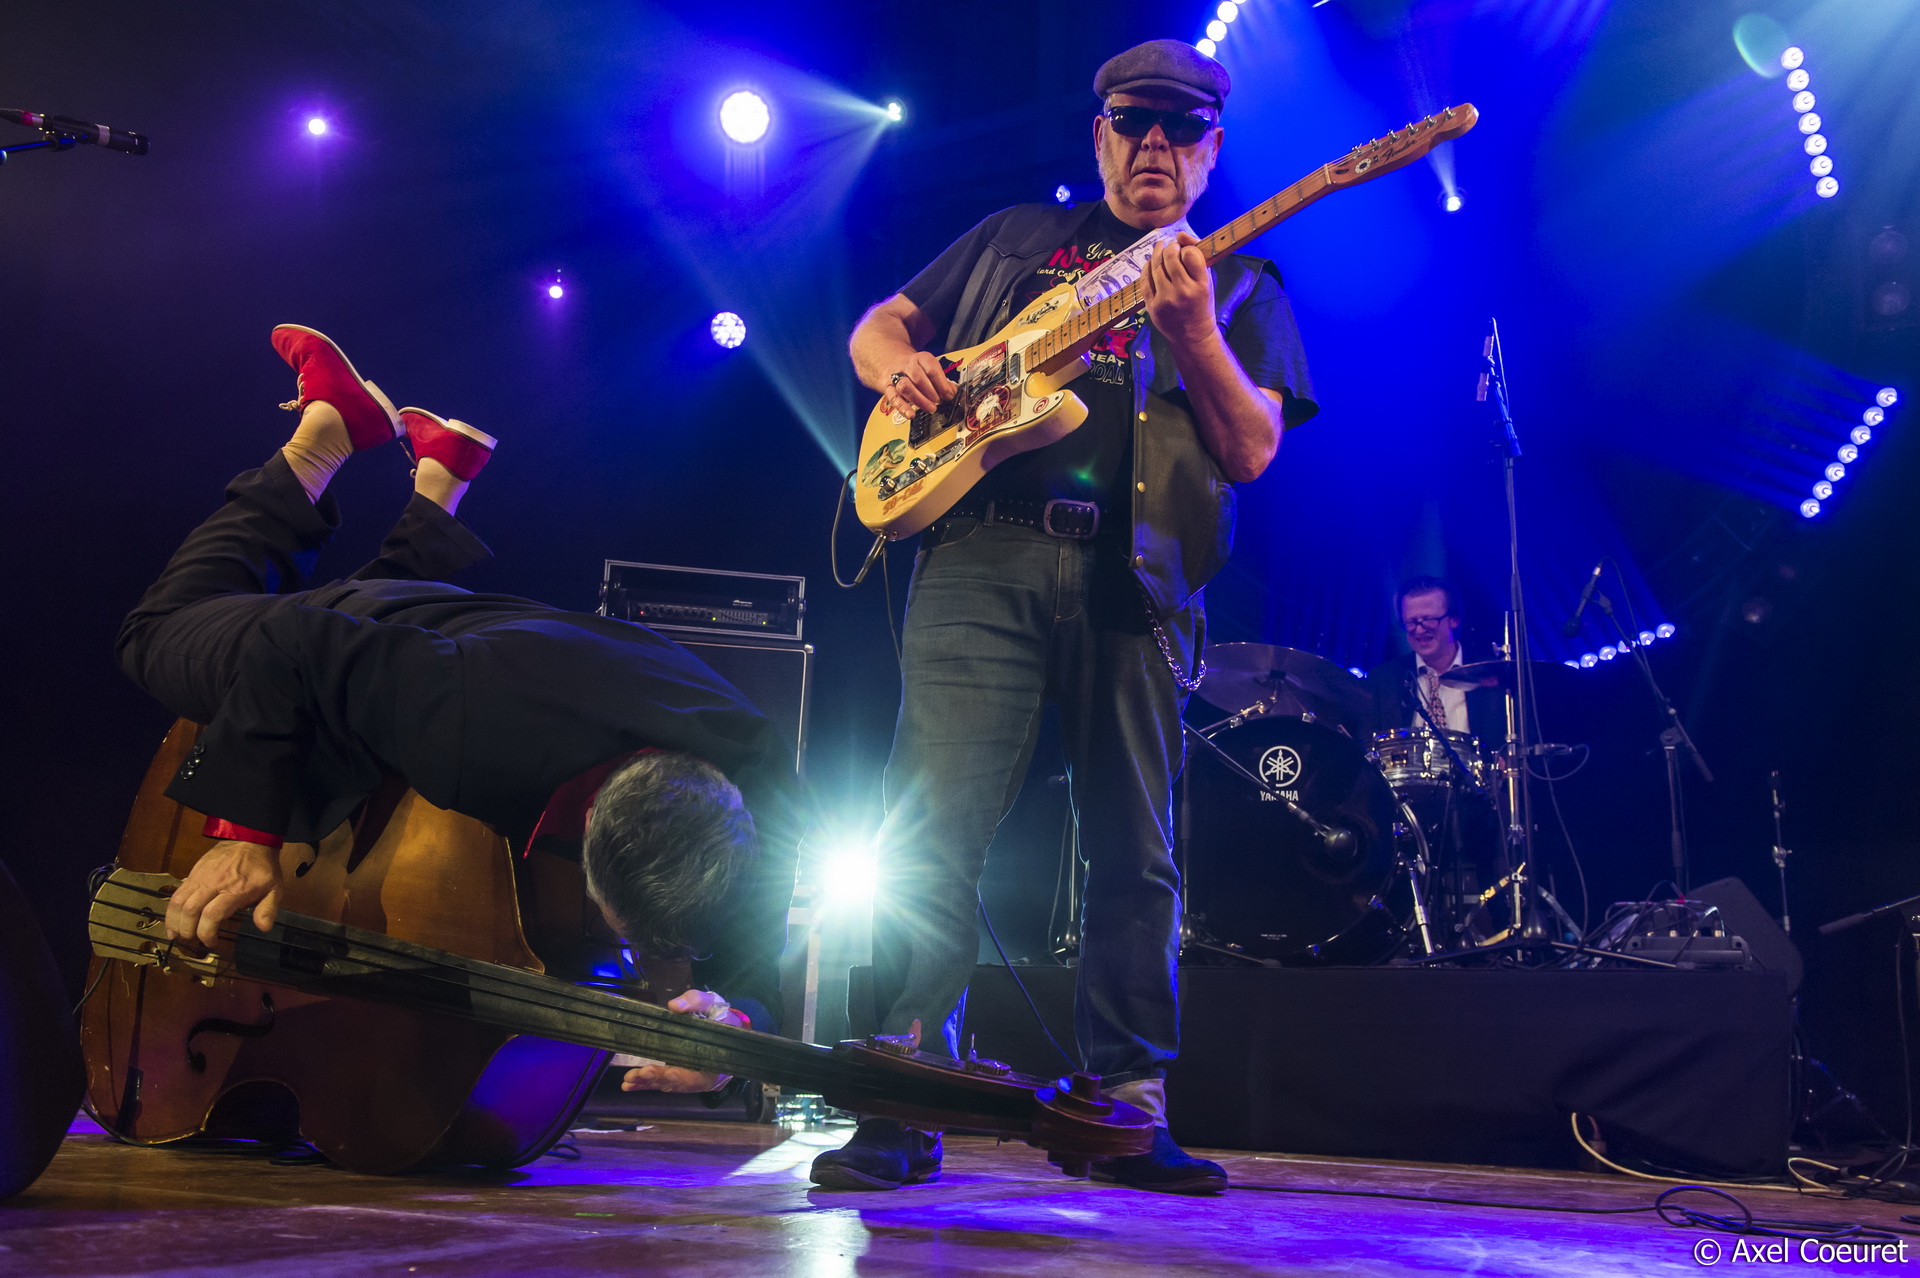 Blues In Bezannes - 10ans - Hot Chickens